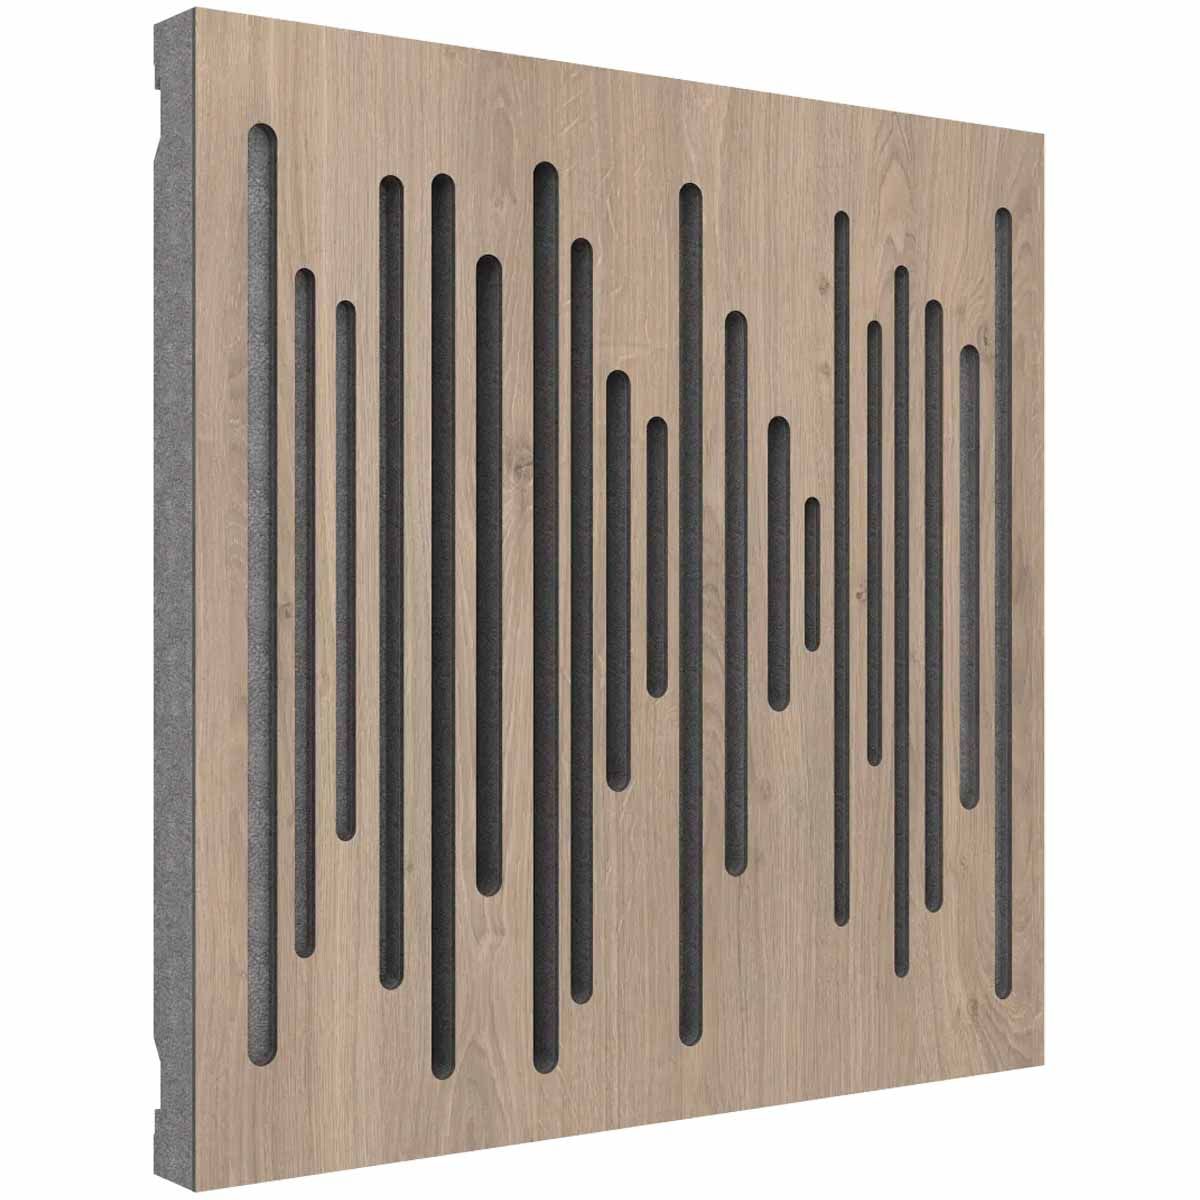 Vicoustic Wavewood Diffuser Ultra MKII Home Theater Diffusion Wall & Ceiling Acoustic Panel - 3 Pack Brown Oak